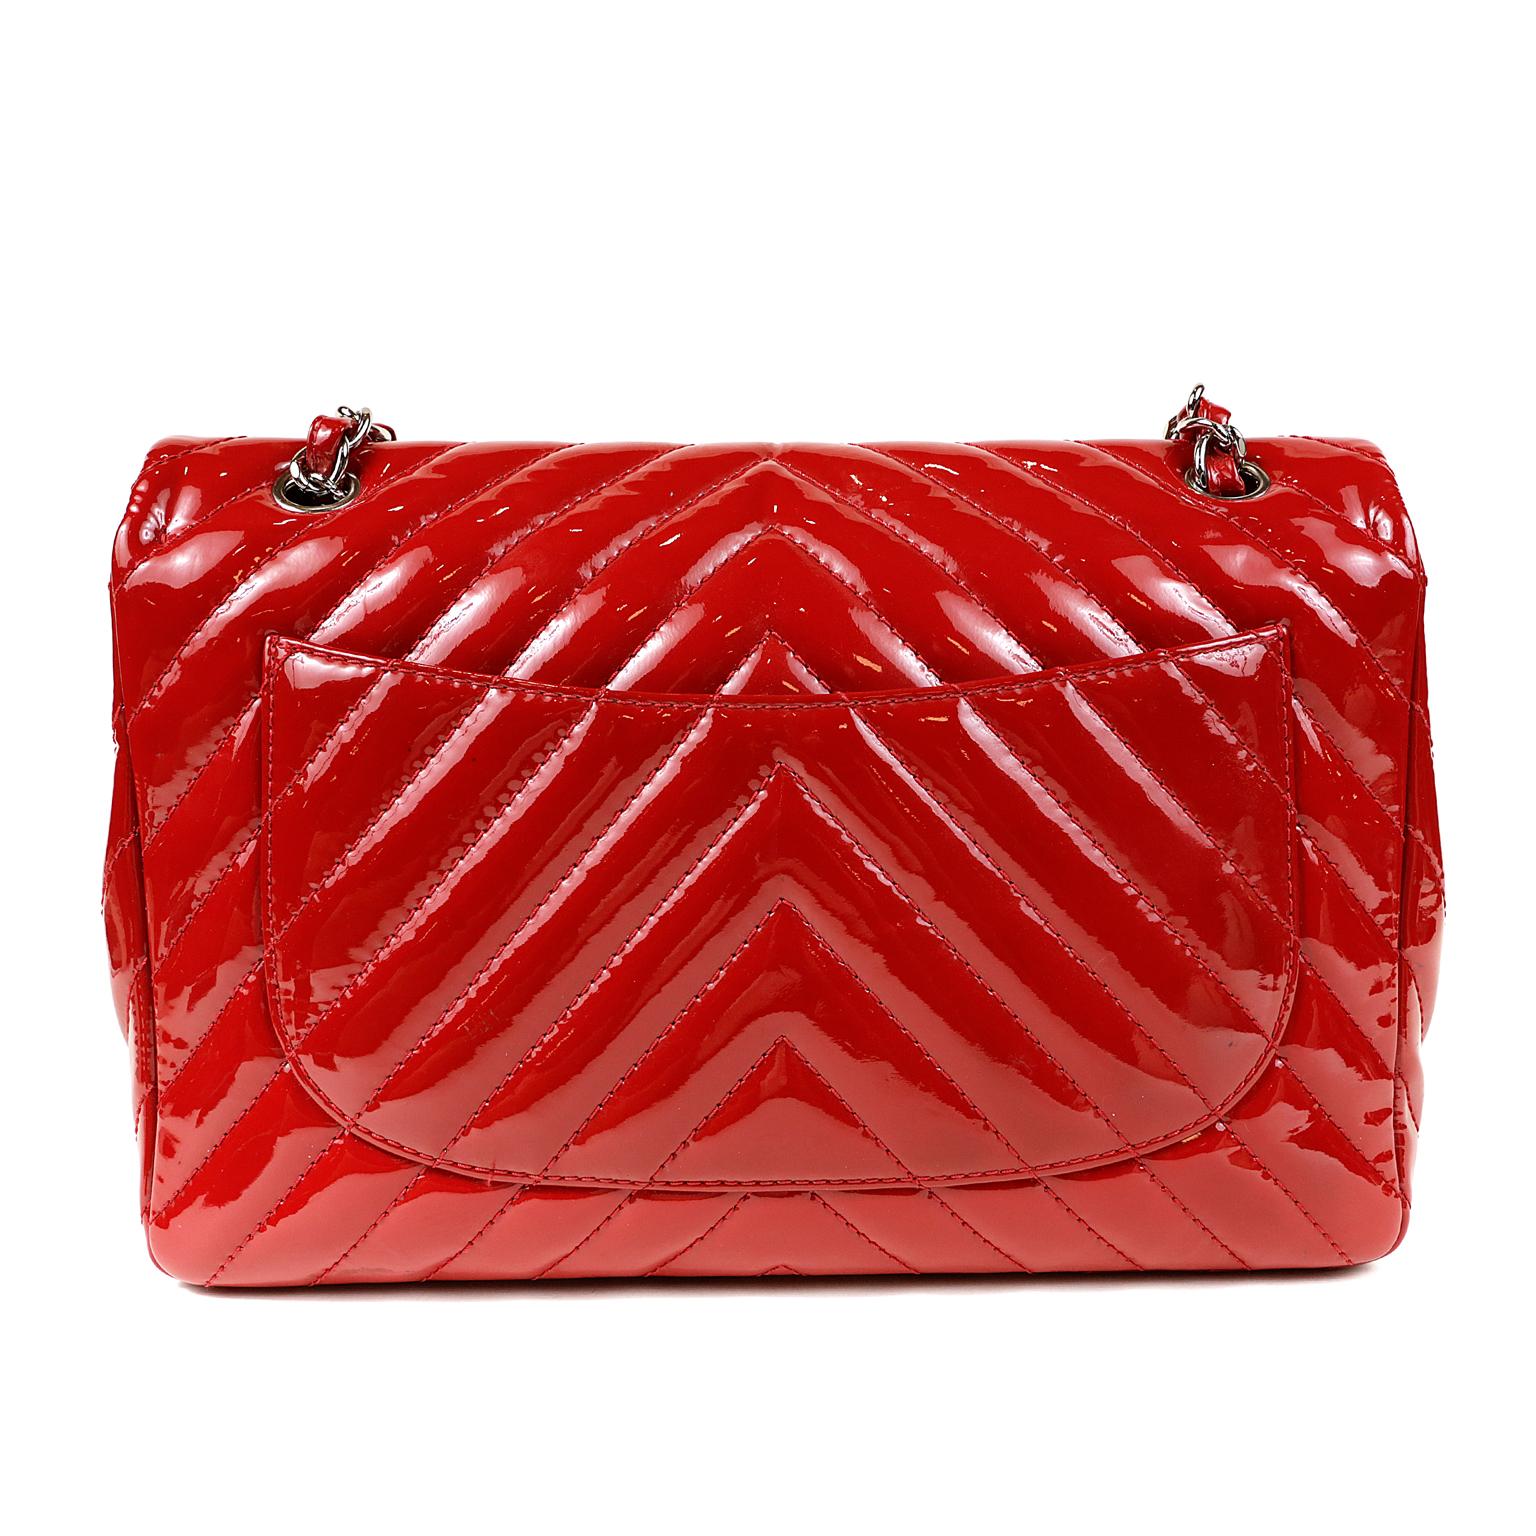 Chanel Red Patent Leather Chevron Jumbo Flap Bag- Pristine Condition
 Striking and beautiful, it is a brilliant addition to any collection.
Lipstick Red durable patent leather is quilted in chevron  pattern.  Silver interlocking CC twist lock